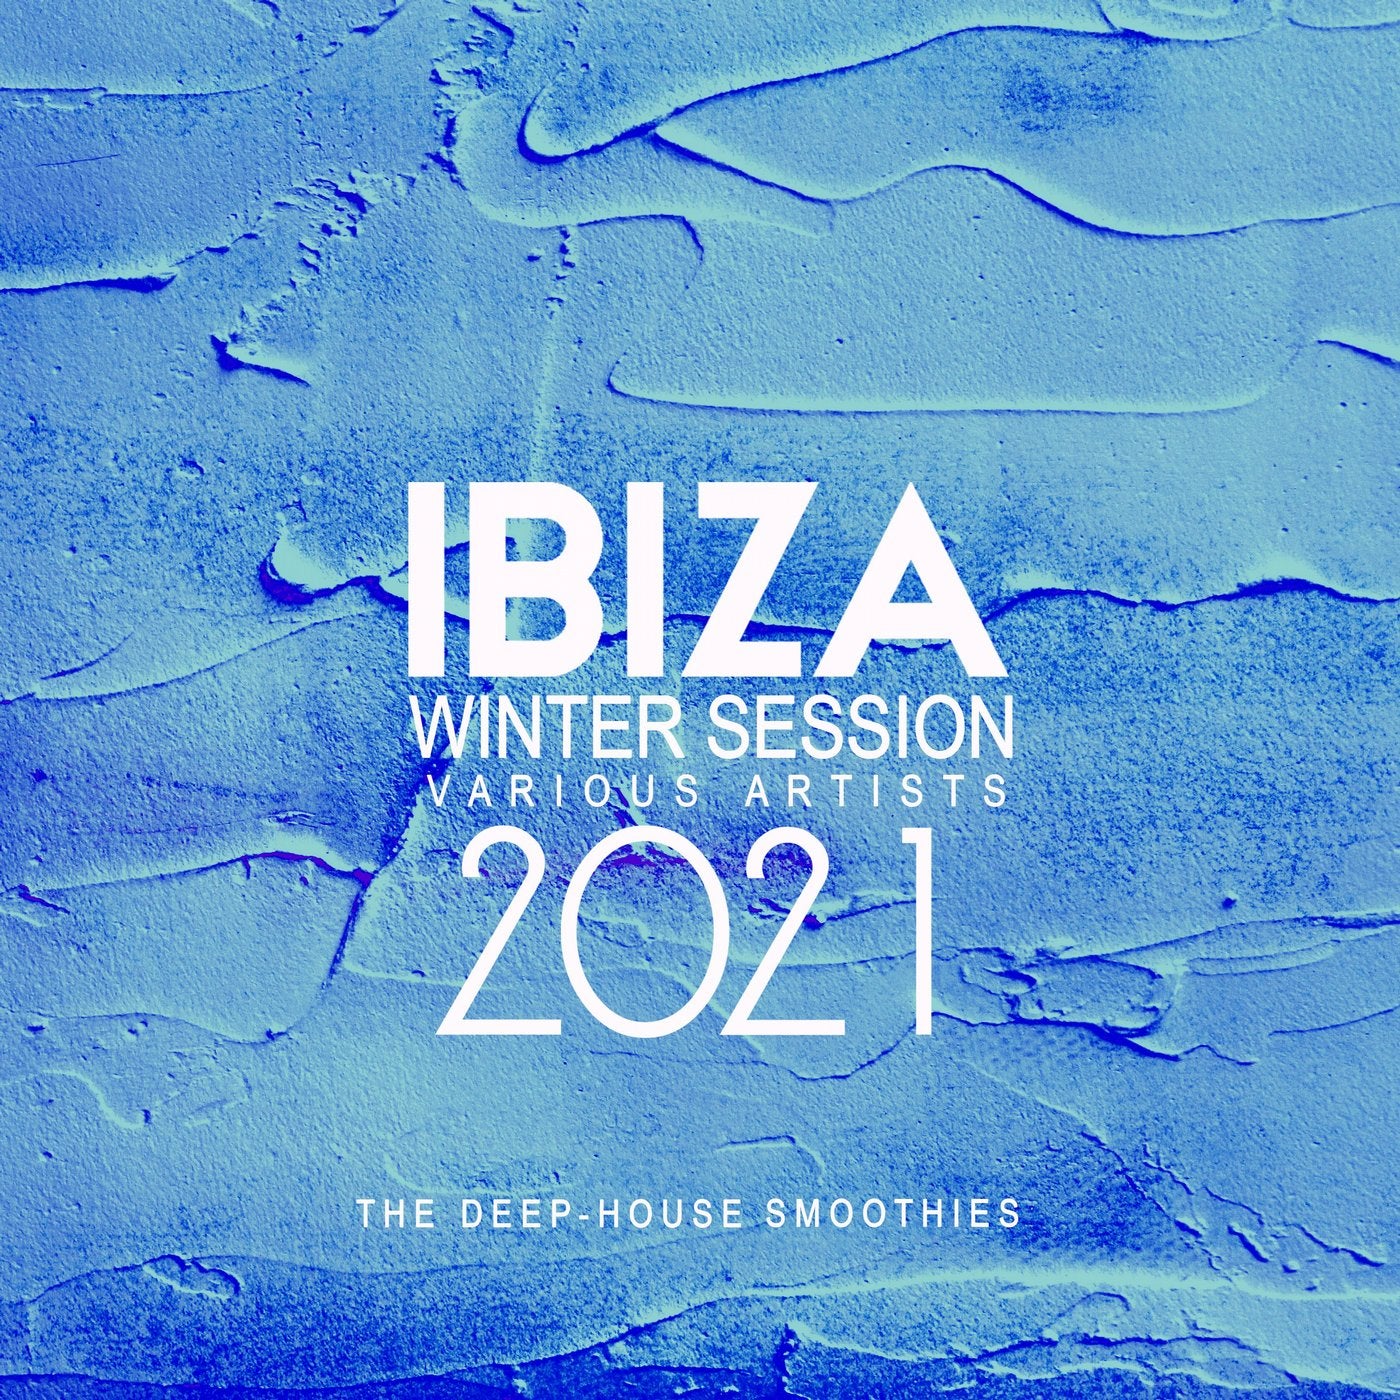 Ibiza Winter Session 2021 (The Deep-House Smoothies)